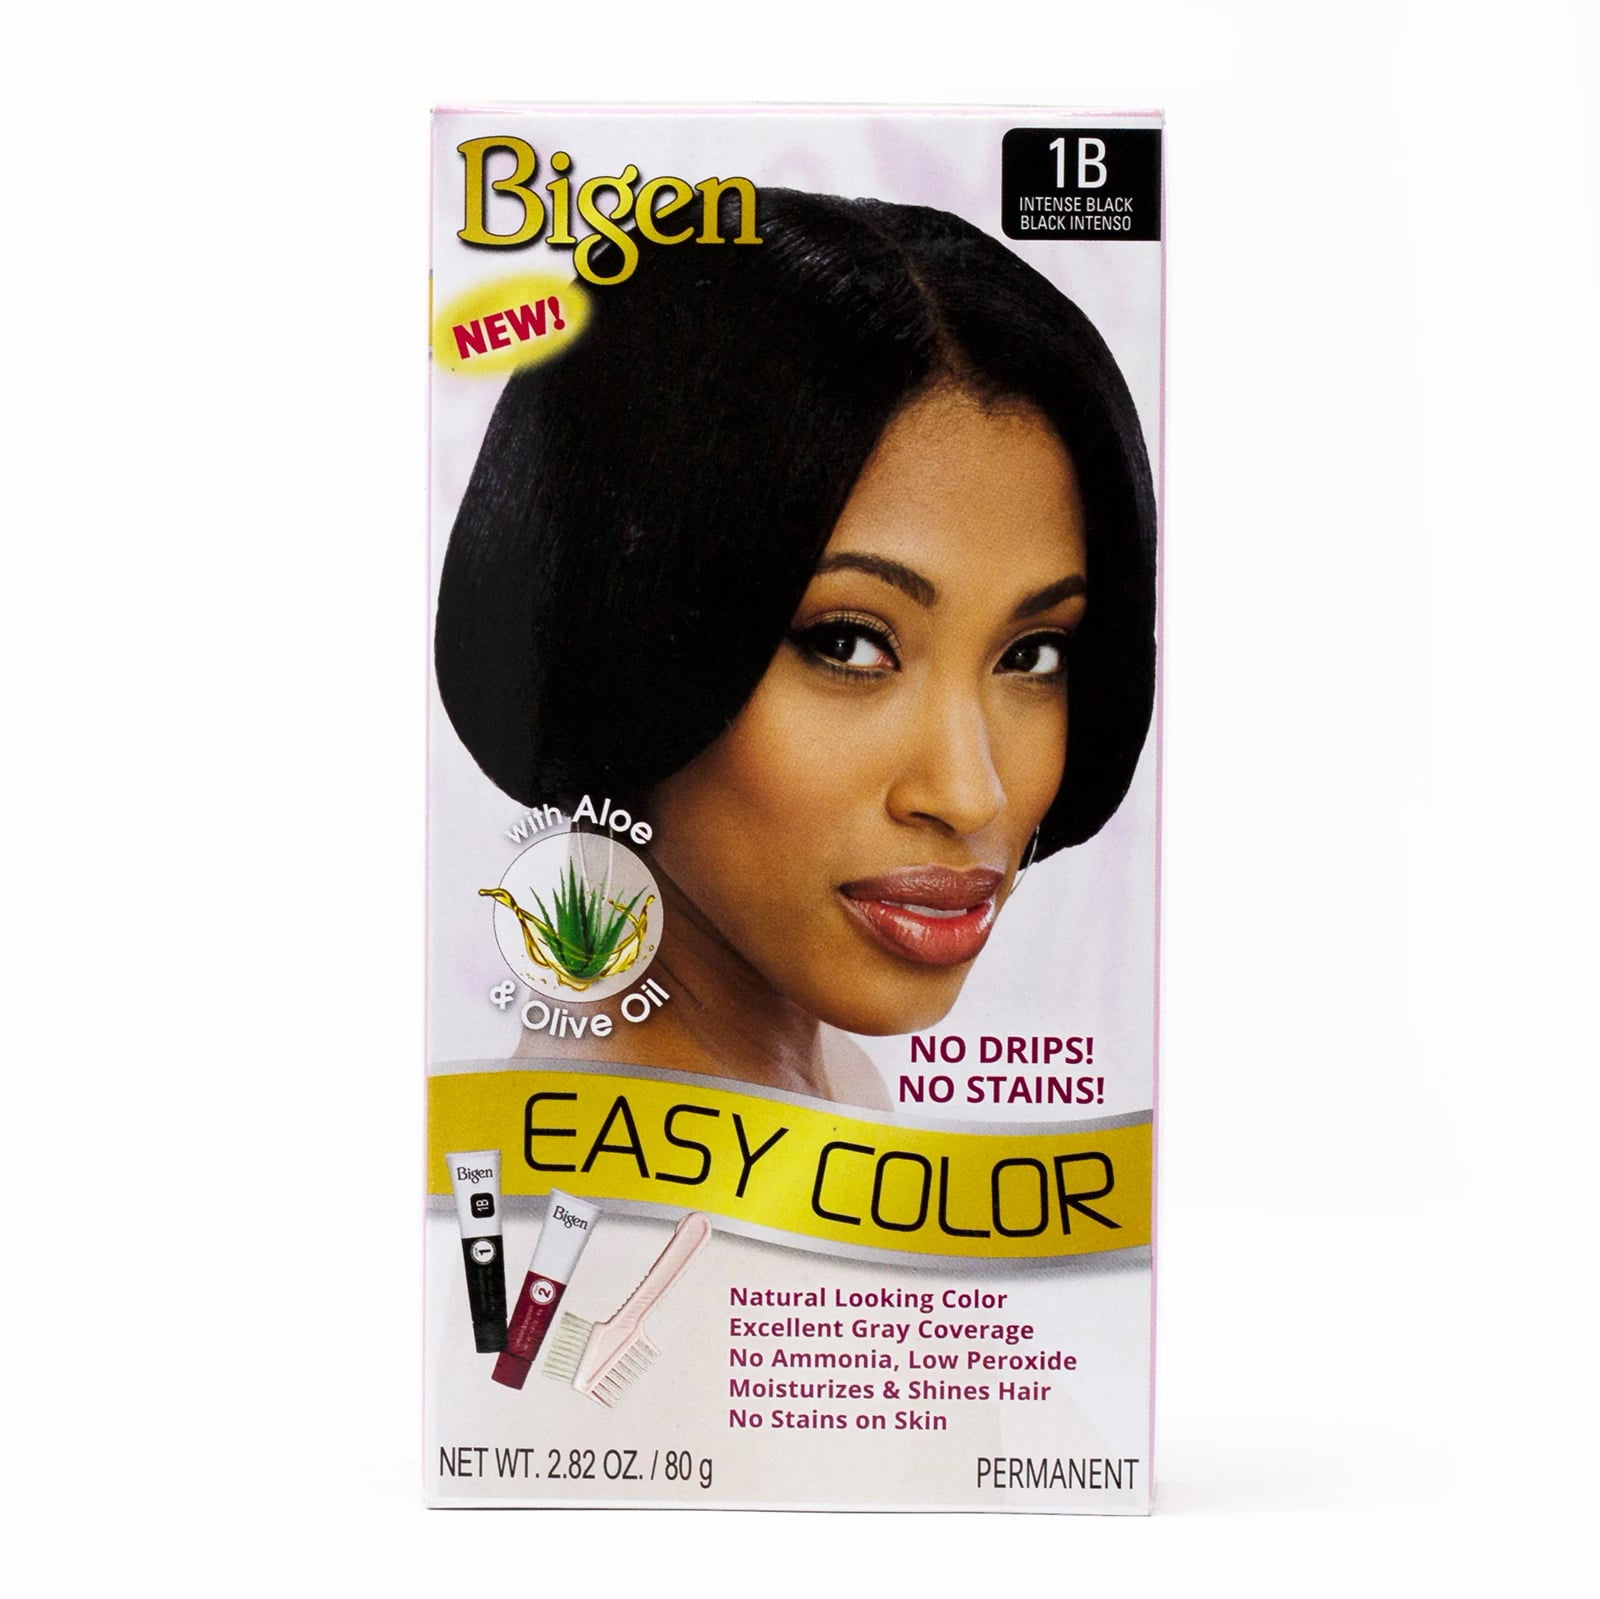 Bigen Easy Hair Color Permanent #1B Intense Black Kit with Aloe & Olive  Oil, 1 Count, 3 Pack 